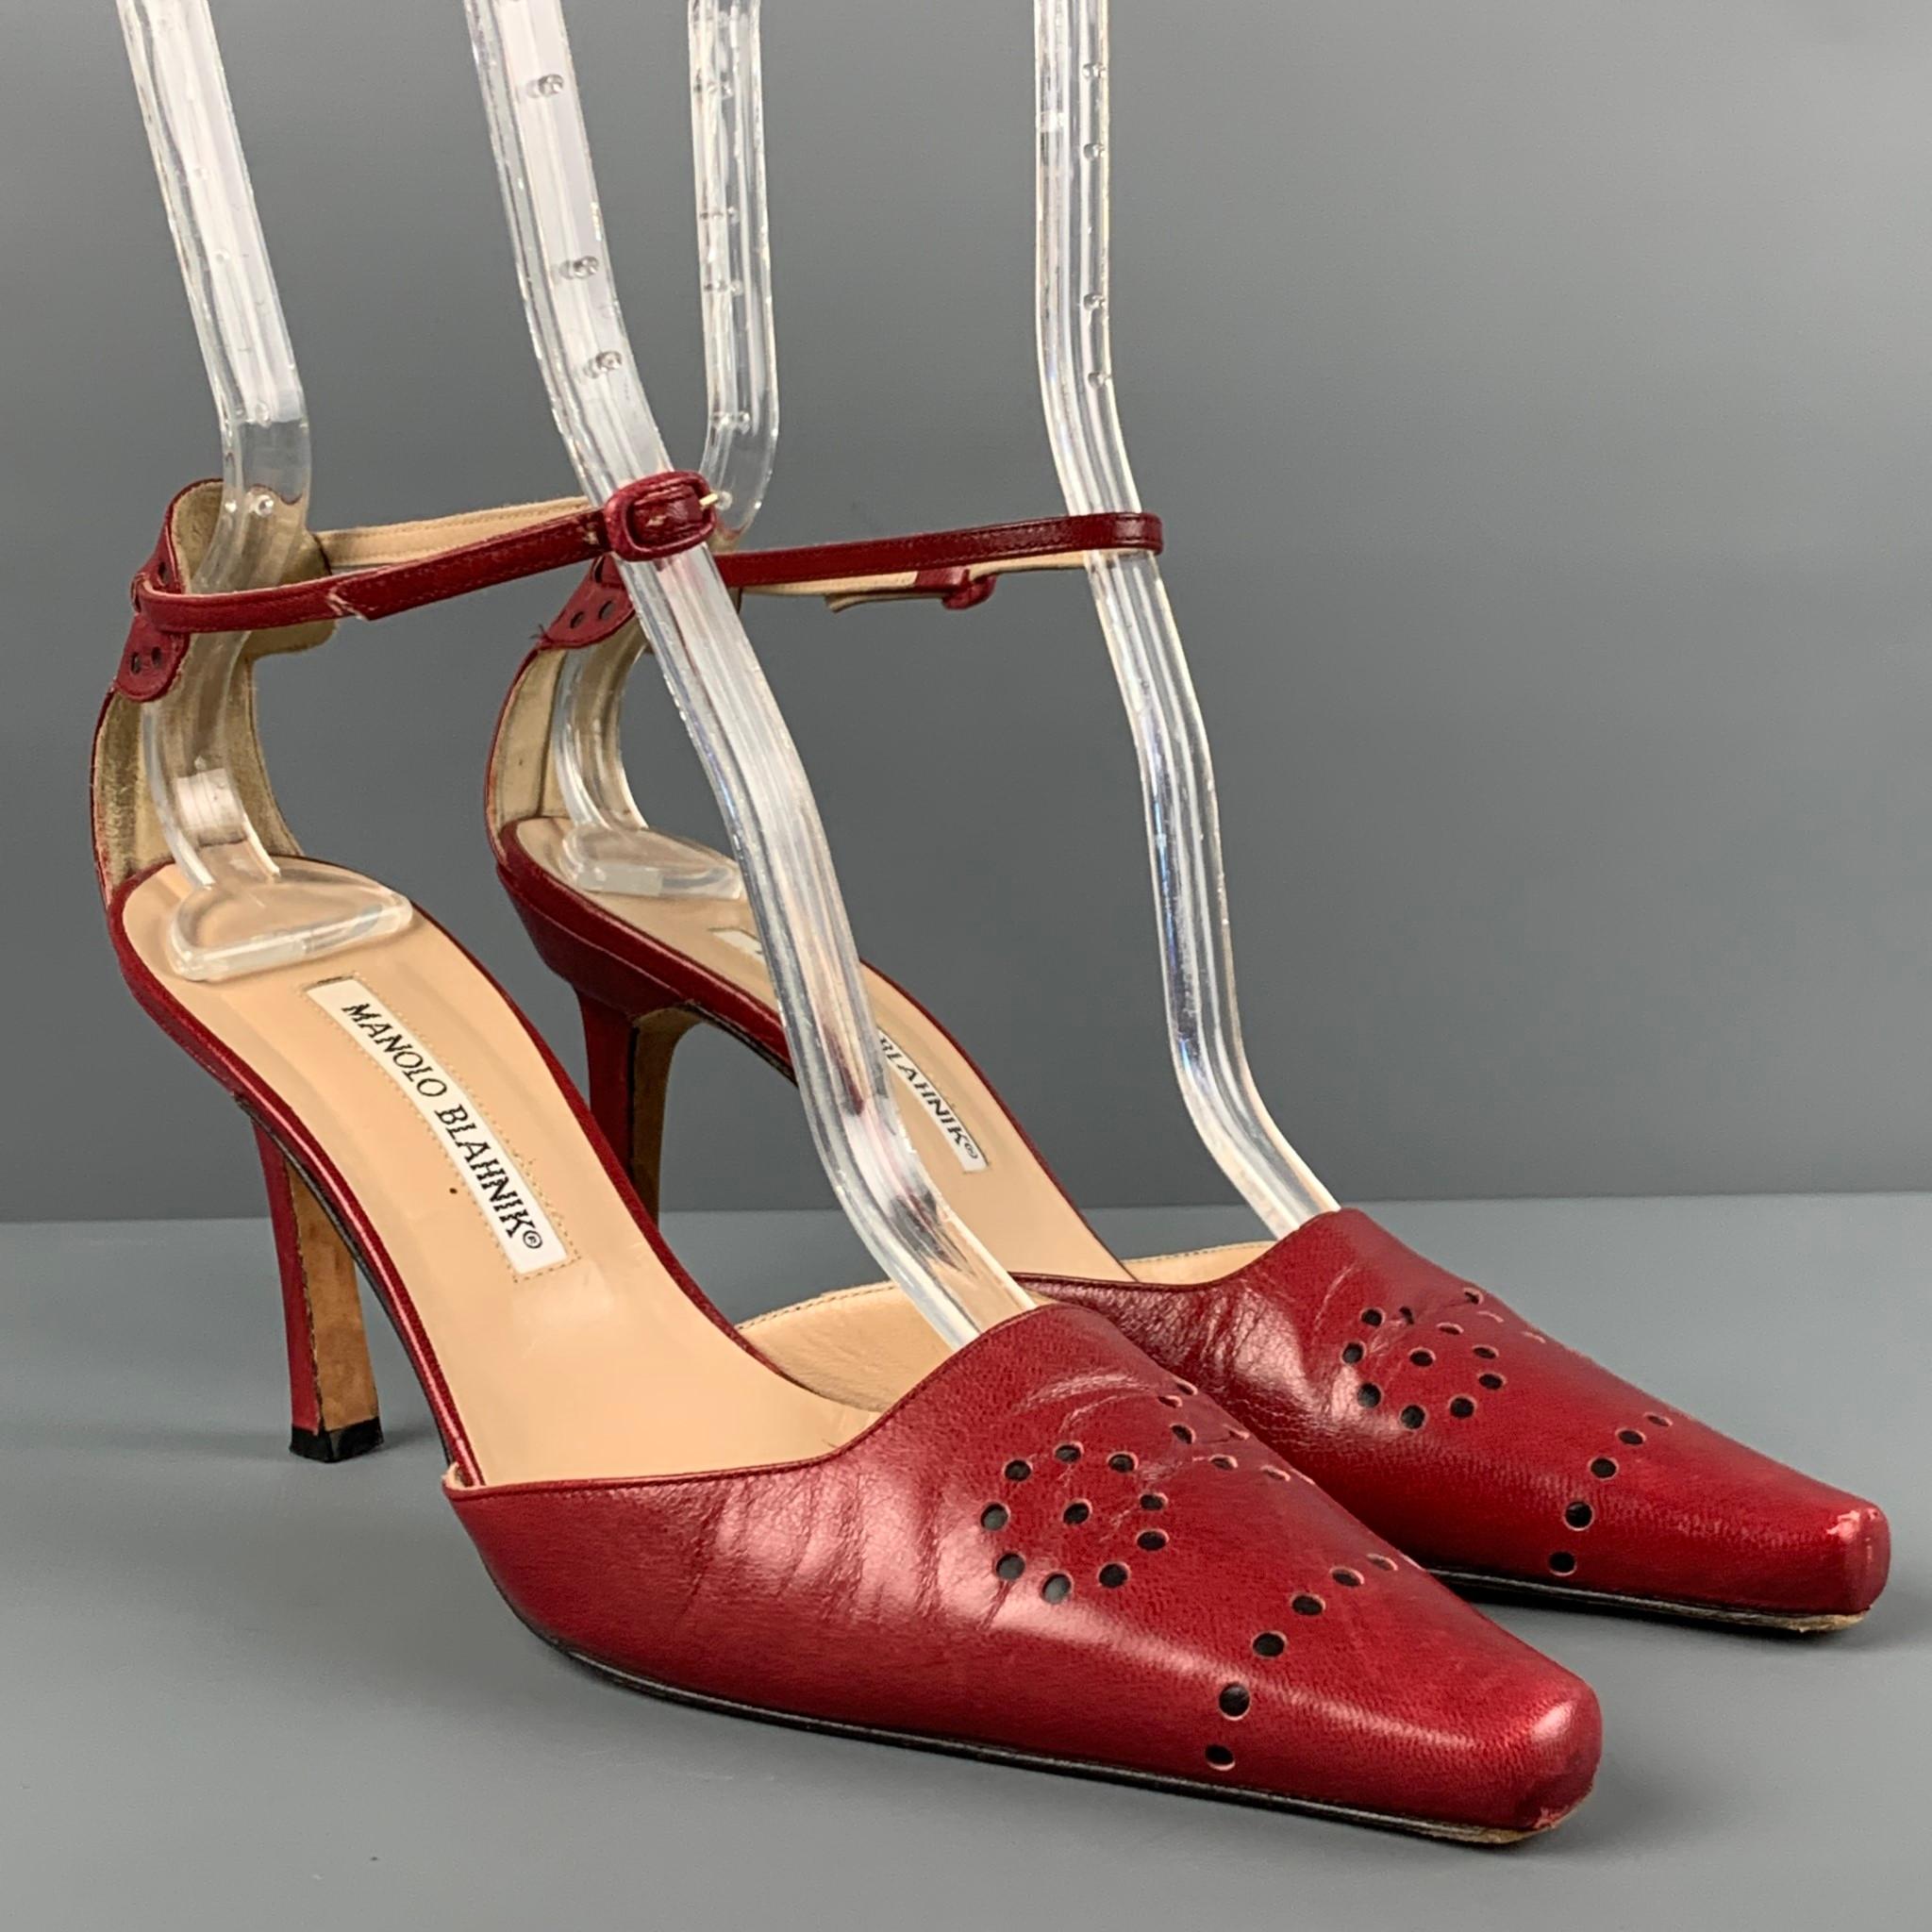 MANOLO BLAHNIK pumps comes in a red perforated leather featuring a square toe, ankle strap, and a stiletto heel. Made in Italy. 

Good Pre-Owned Condition.
Marked: 36.5

Measurements:

Heel: 3.25 in. 